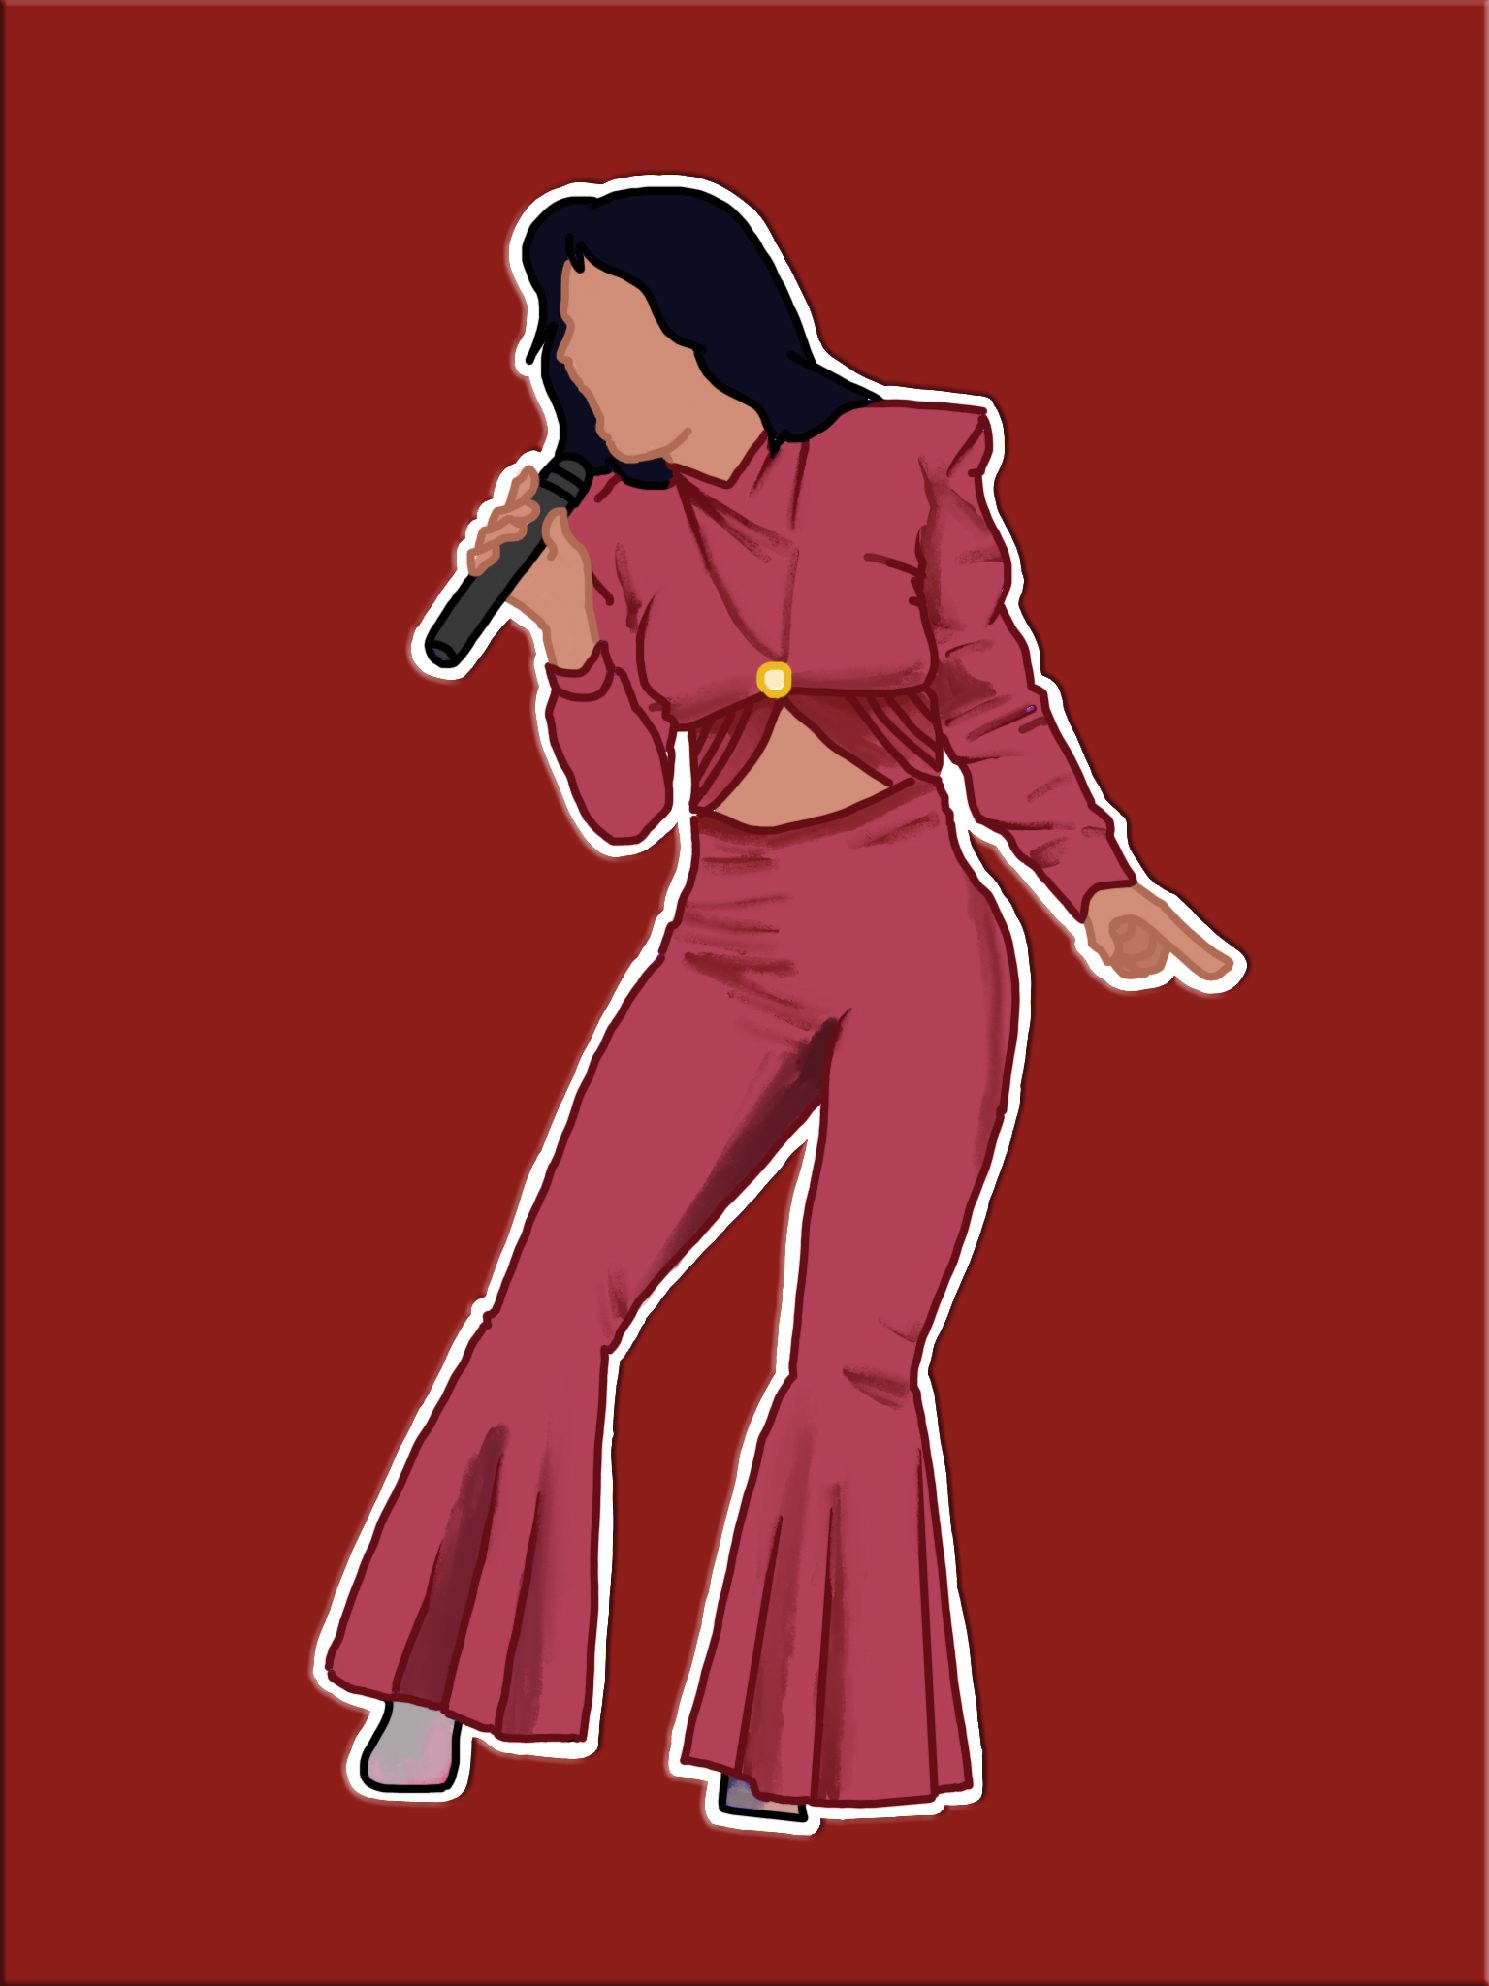 Iconic moment of Selena Quintanilla performing in the purple jump suit from her last concert in the Astrodome, Houston, Texas.